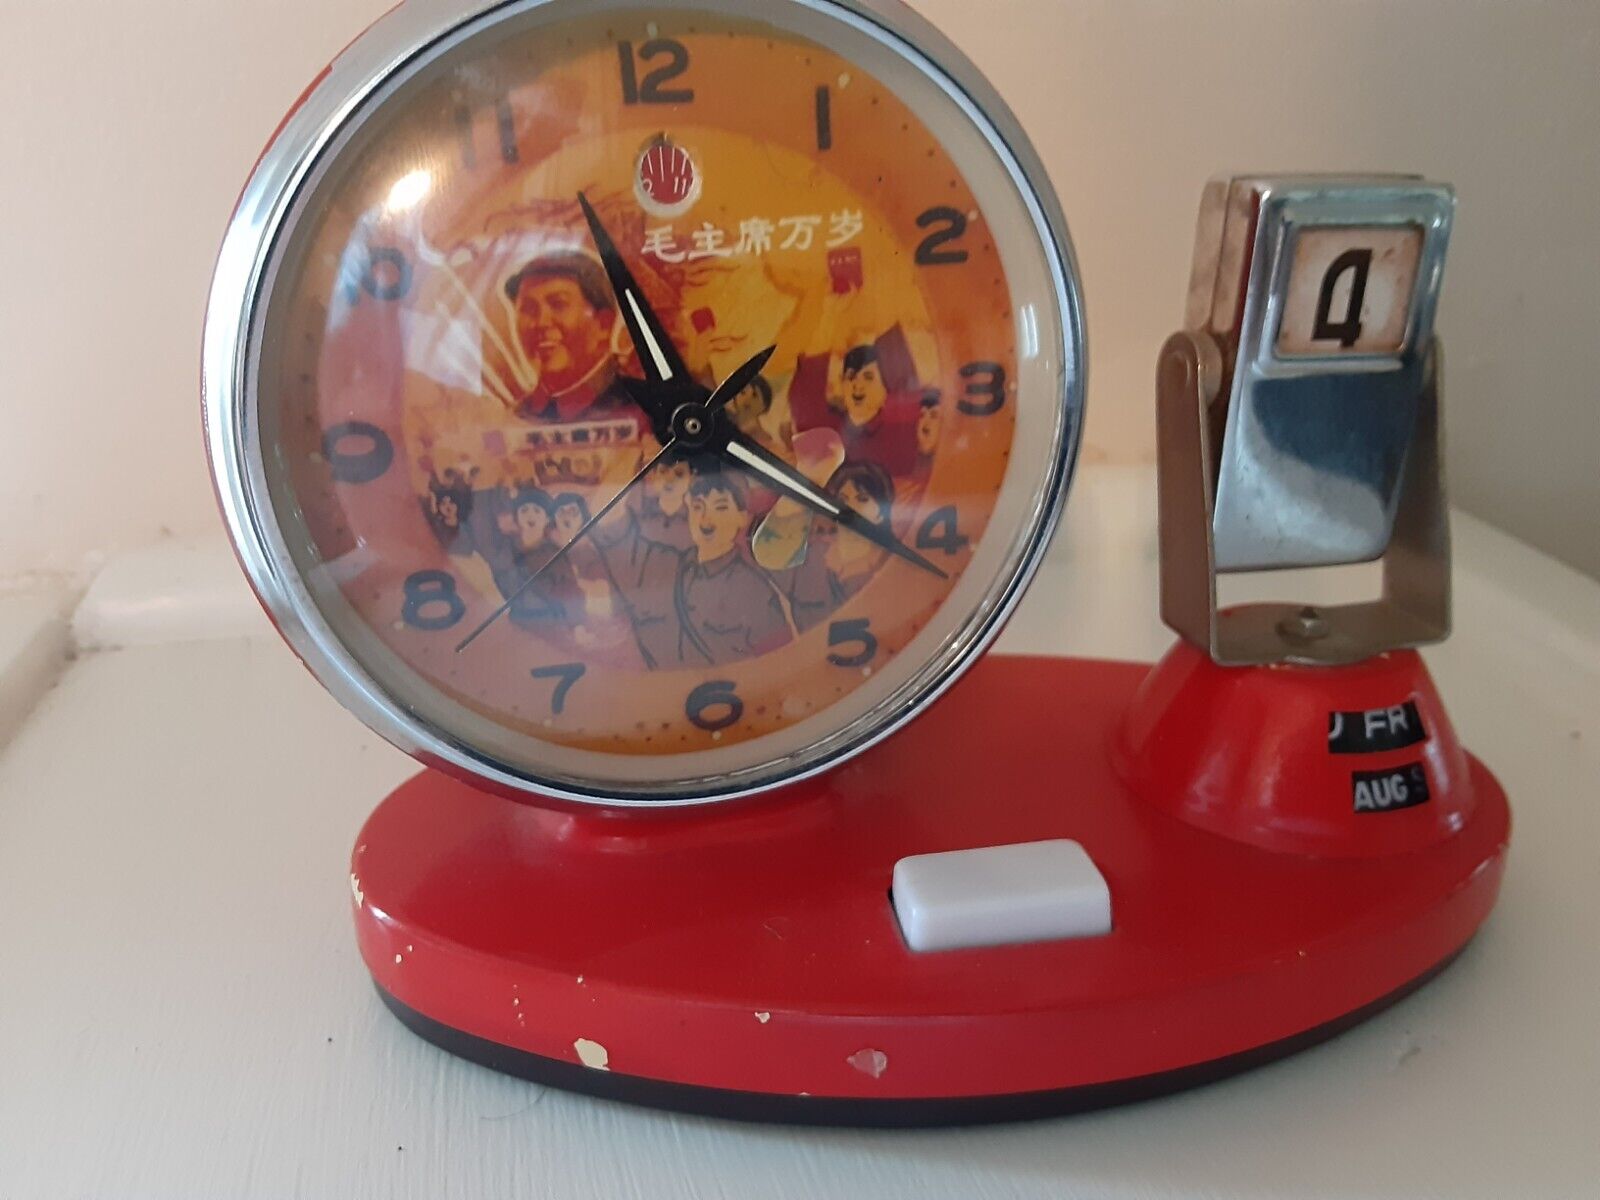 VTG.WIND UP ALARM CLOCK MAOZEDONG CHAIRMAN (TESTED WORKS FINE)